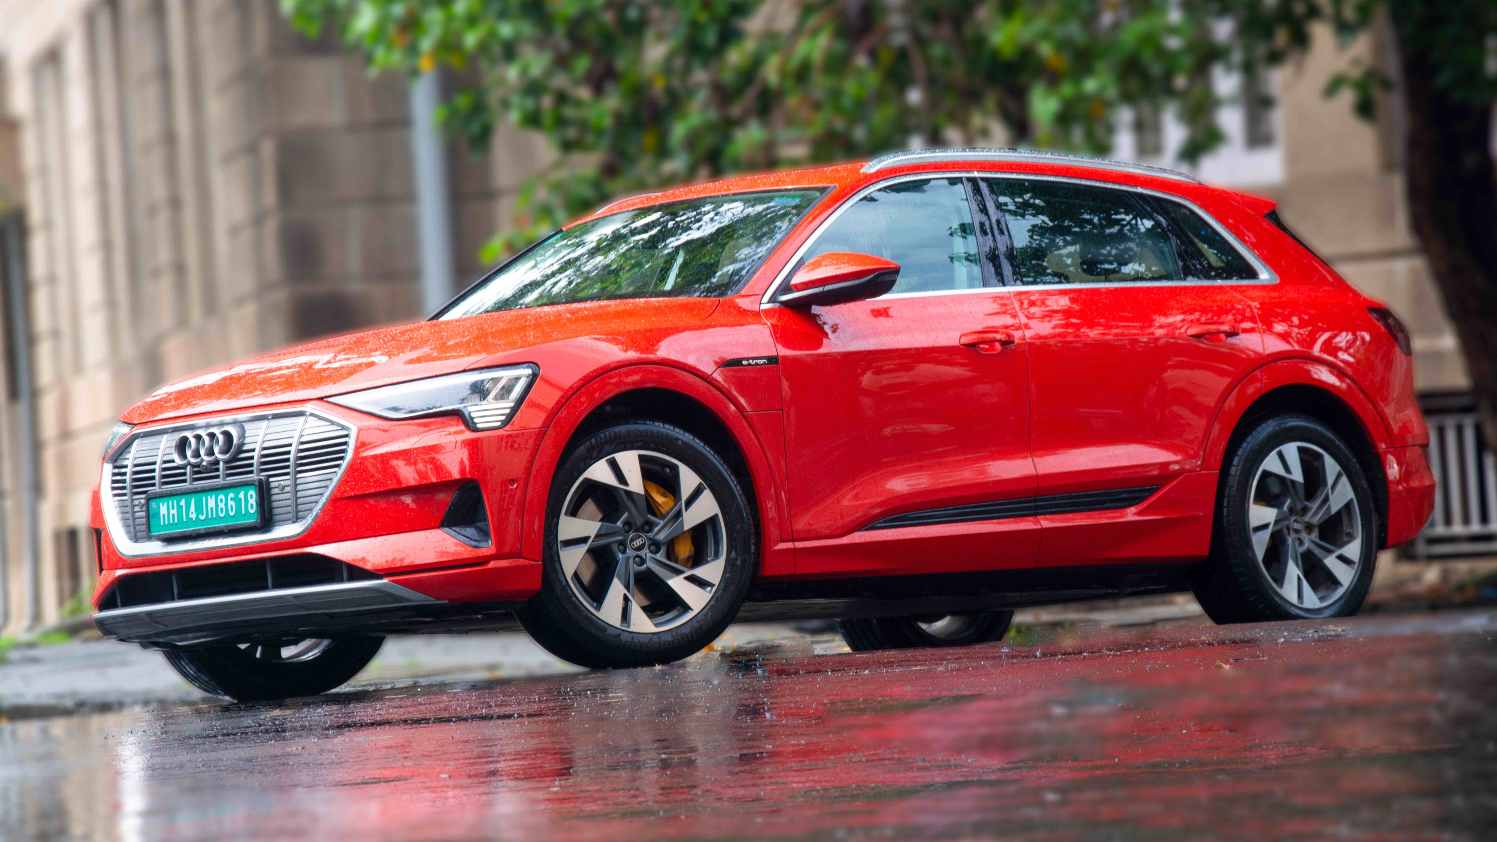 The Audi e-tron SUV will be available in '50' and '55' variants. Image: Audi India